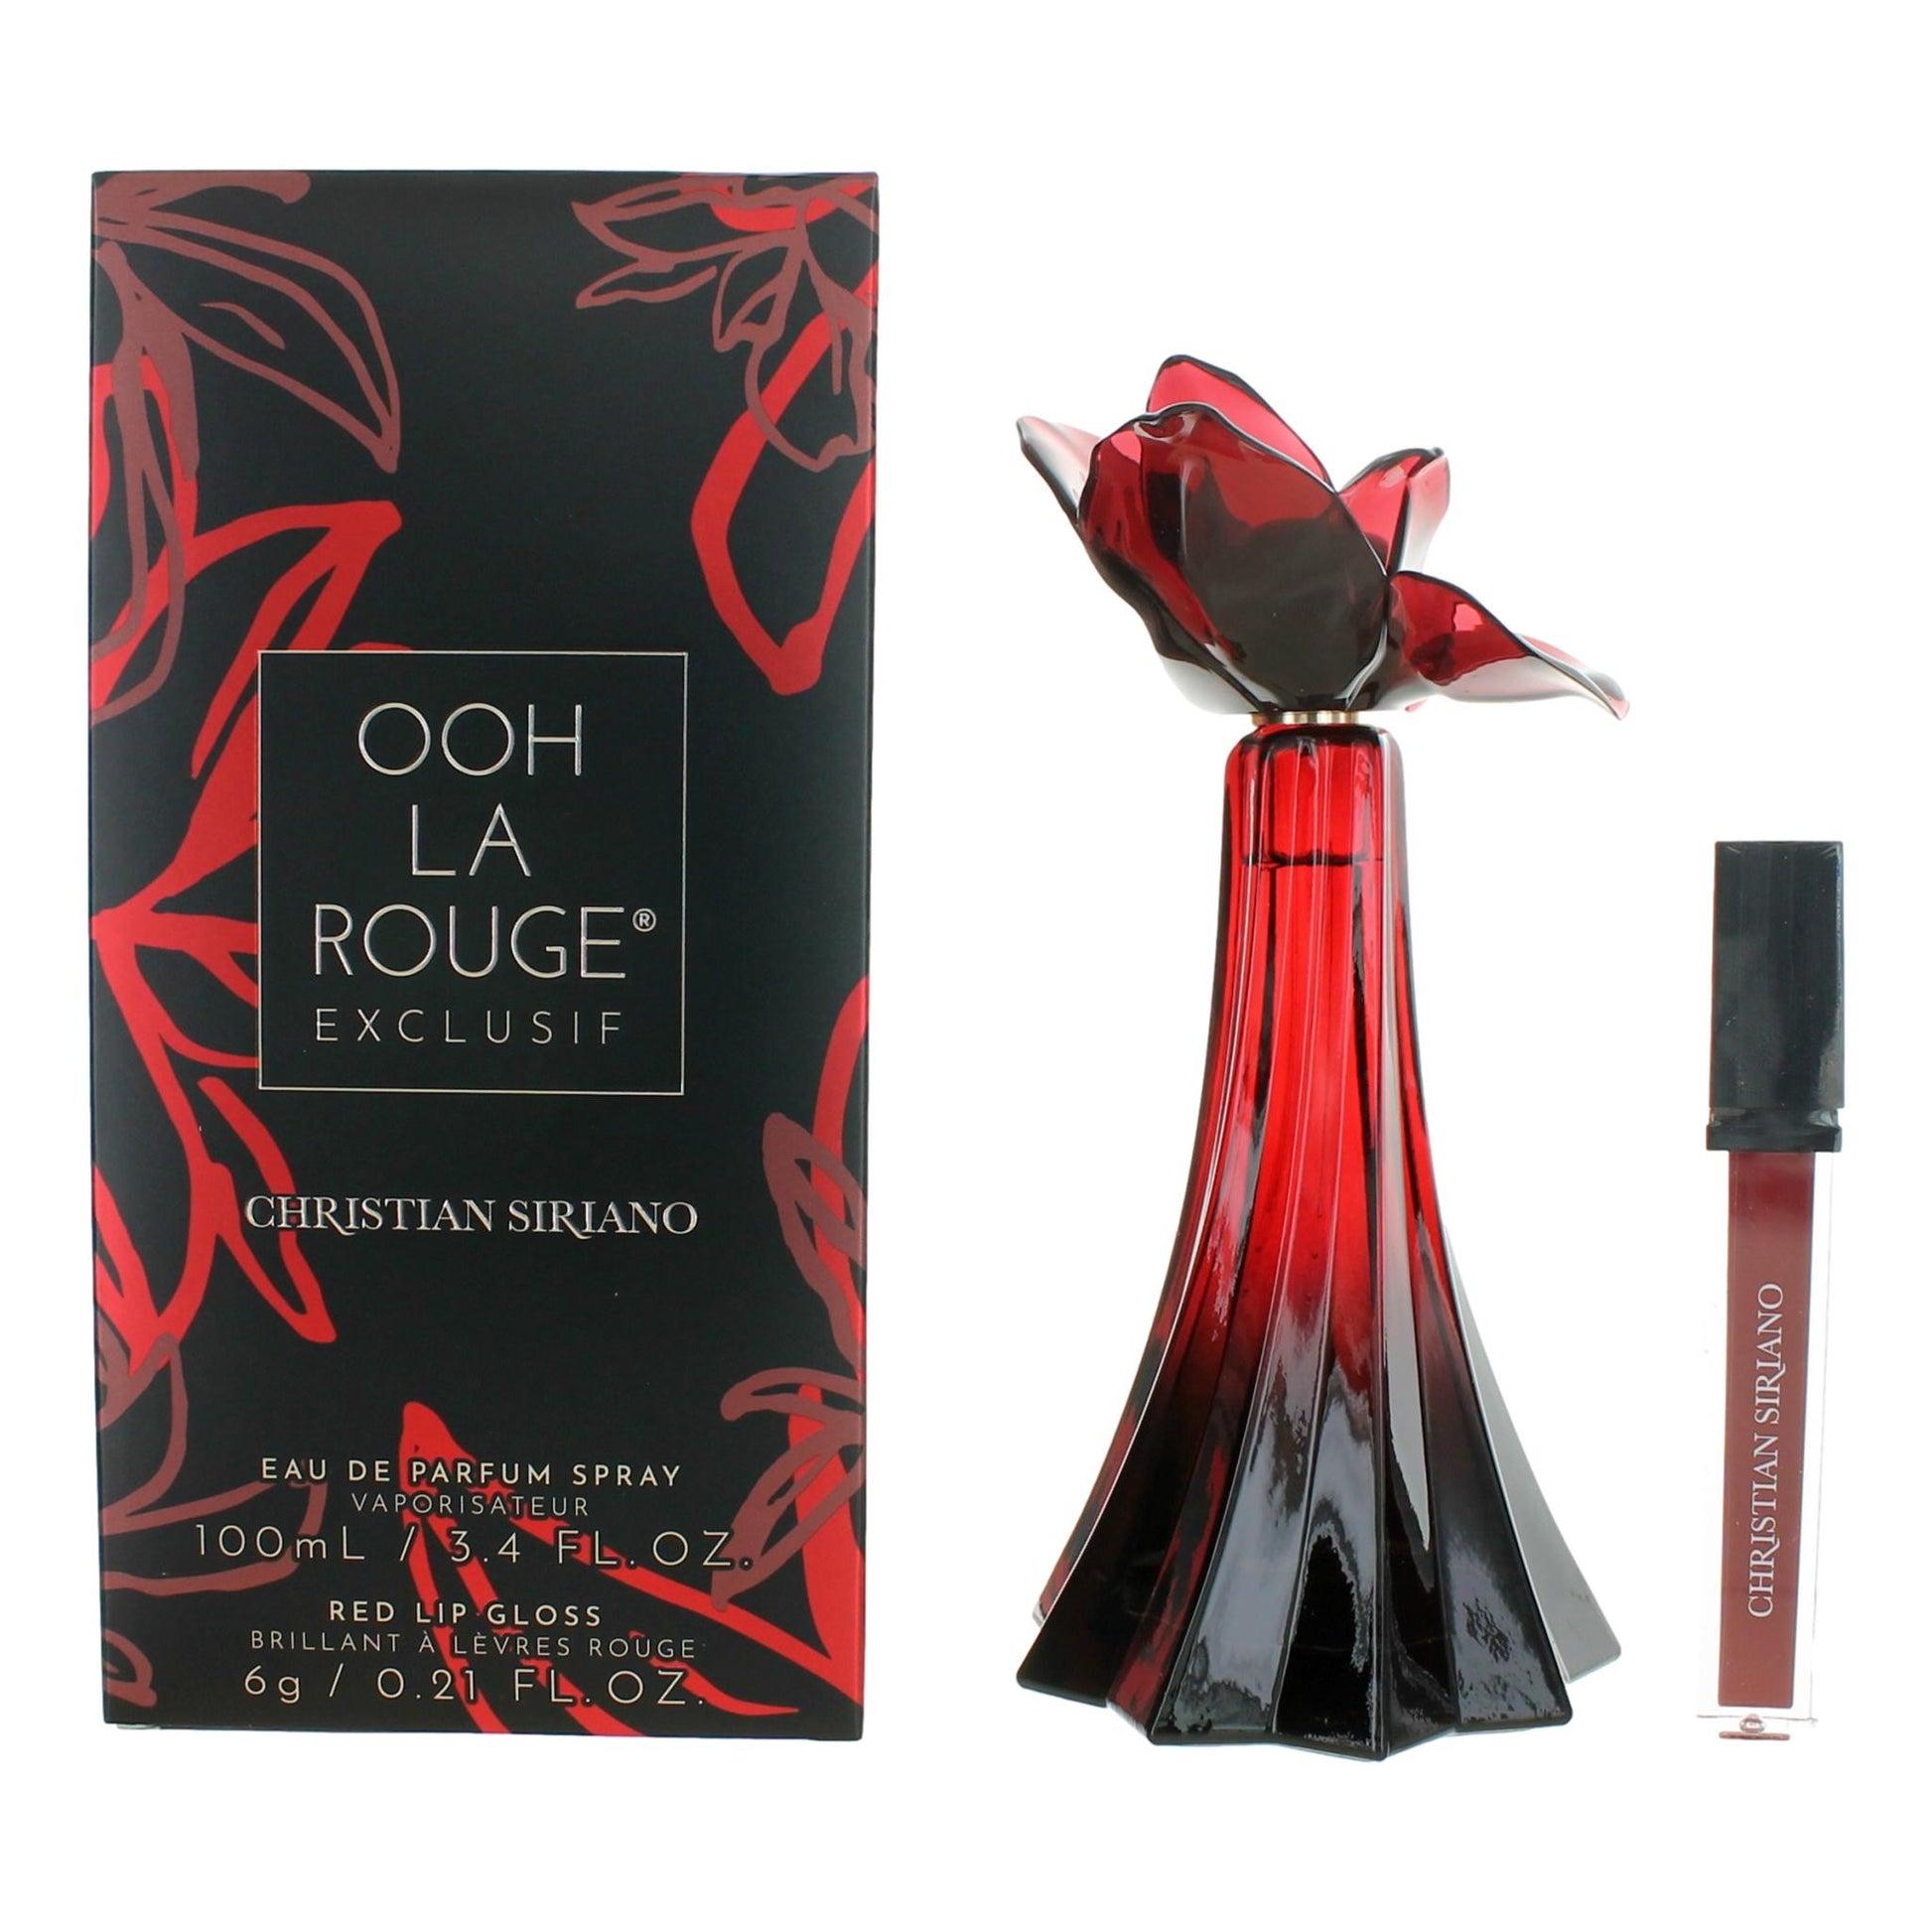 Ooh La Rouge Exclusif by Christian Siriano, 3.4oz EDP Spray women with Lip Gloss